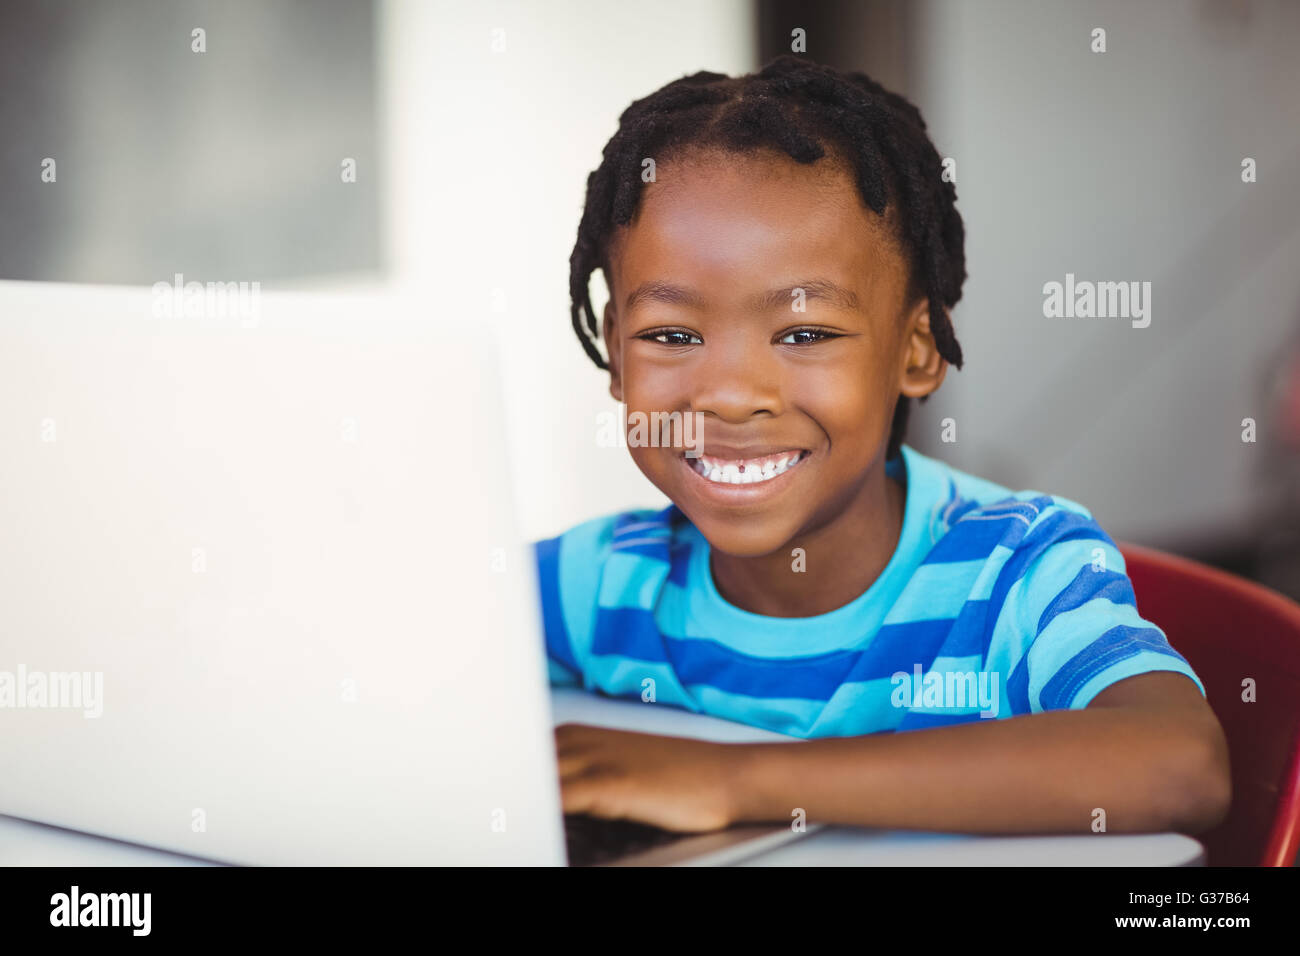 Schoolboy sitting on chair and using laptop at school Stock Photo